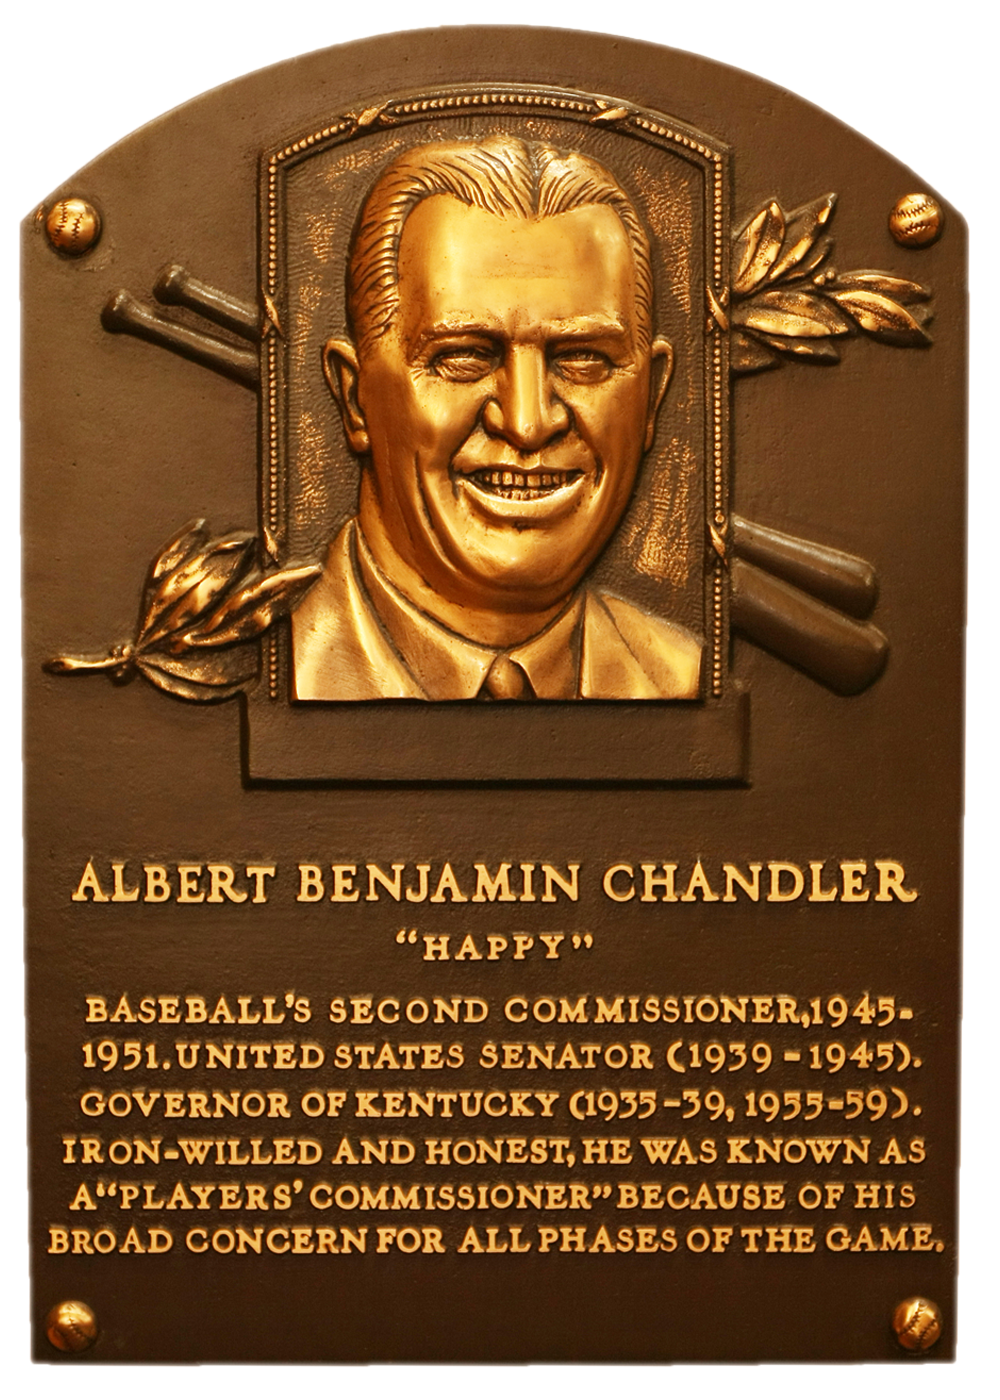 Happy Chandler Hall of Fame plaque